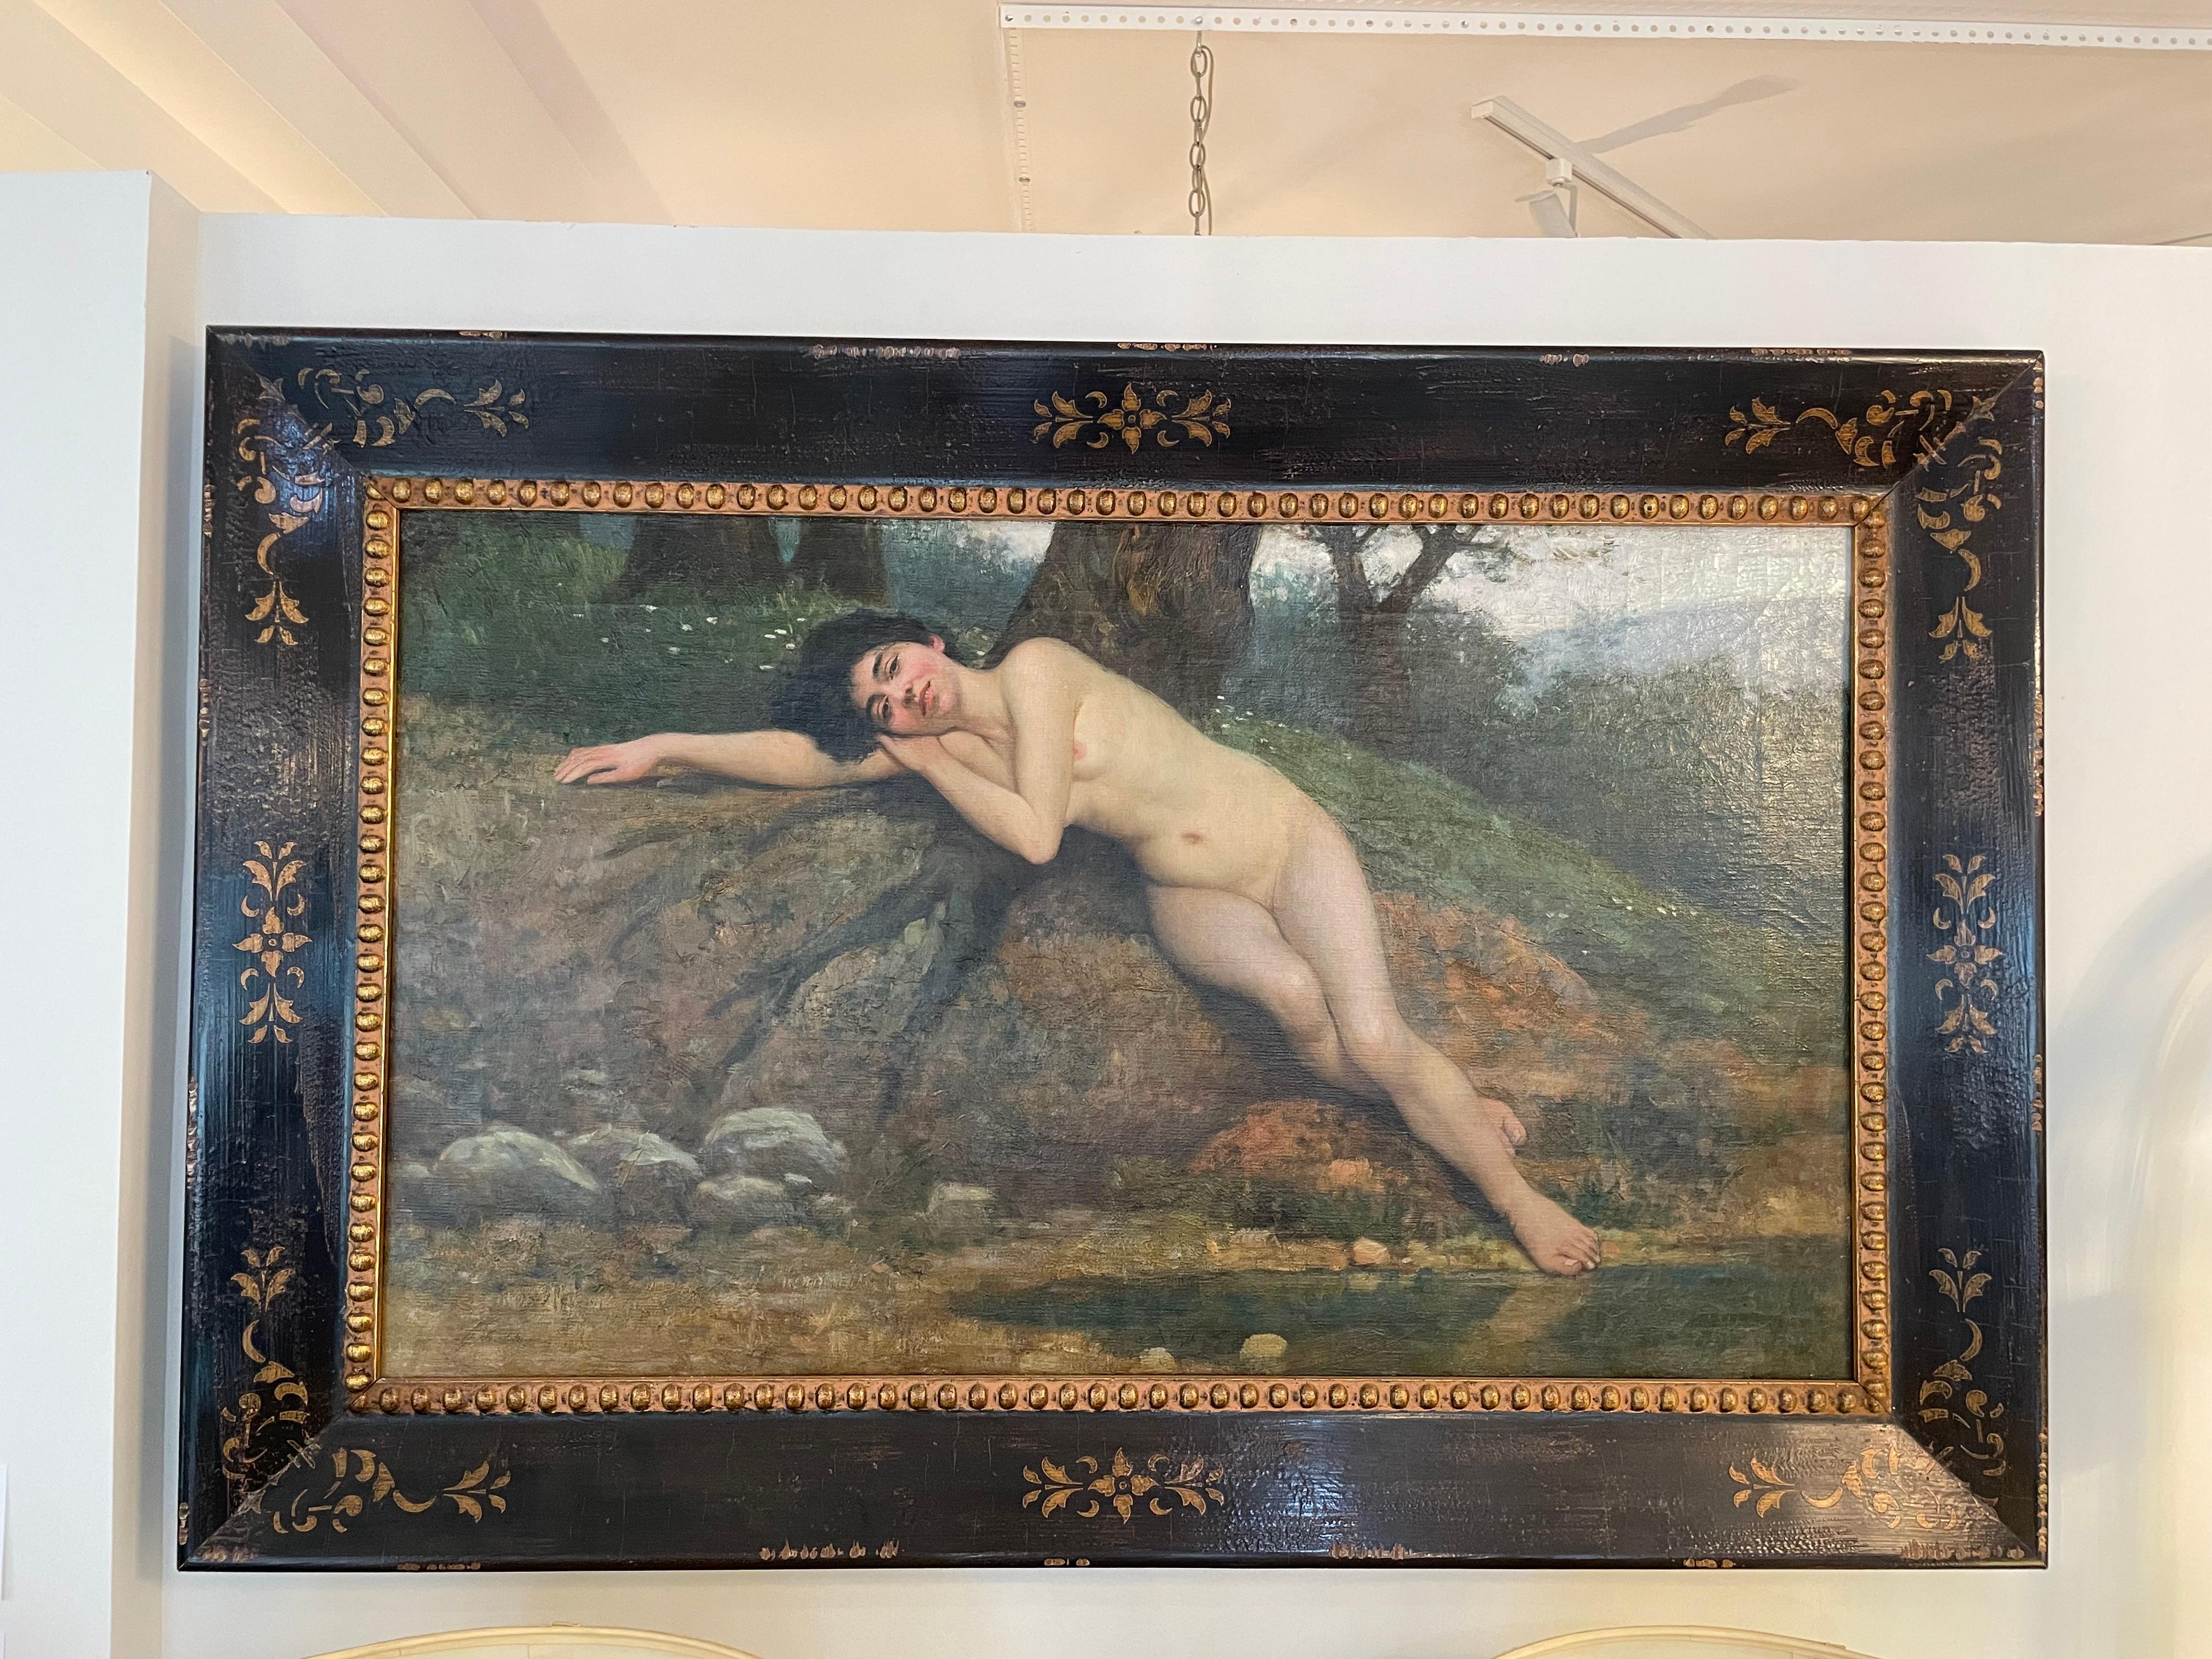 This Edwardian era painting by Giovanni Boldini of recling nude figure dates to the late 19th and early 20th century.

Note: The painting at some point was relined on the outside edges of the canvas so as to be restretched for the new